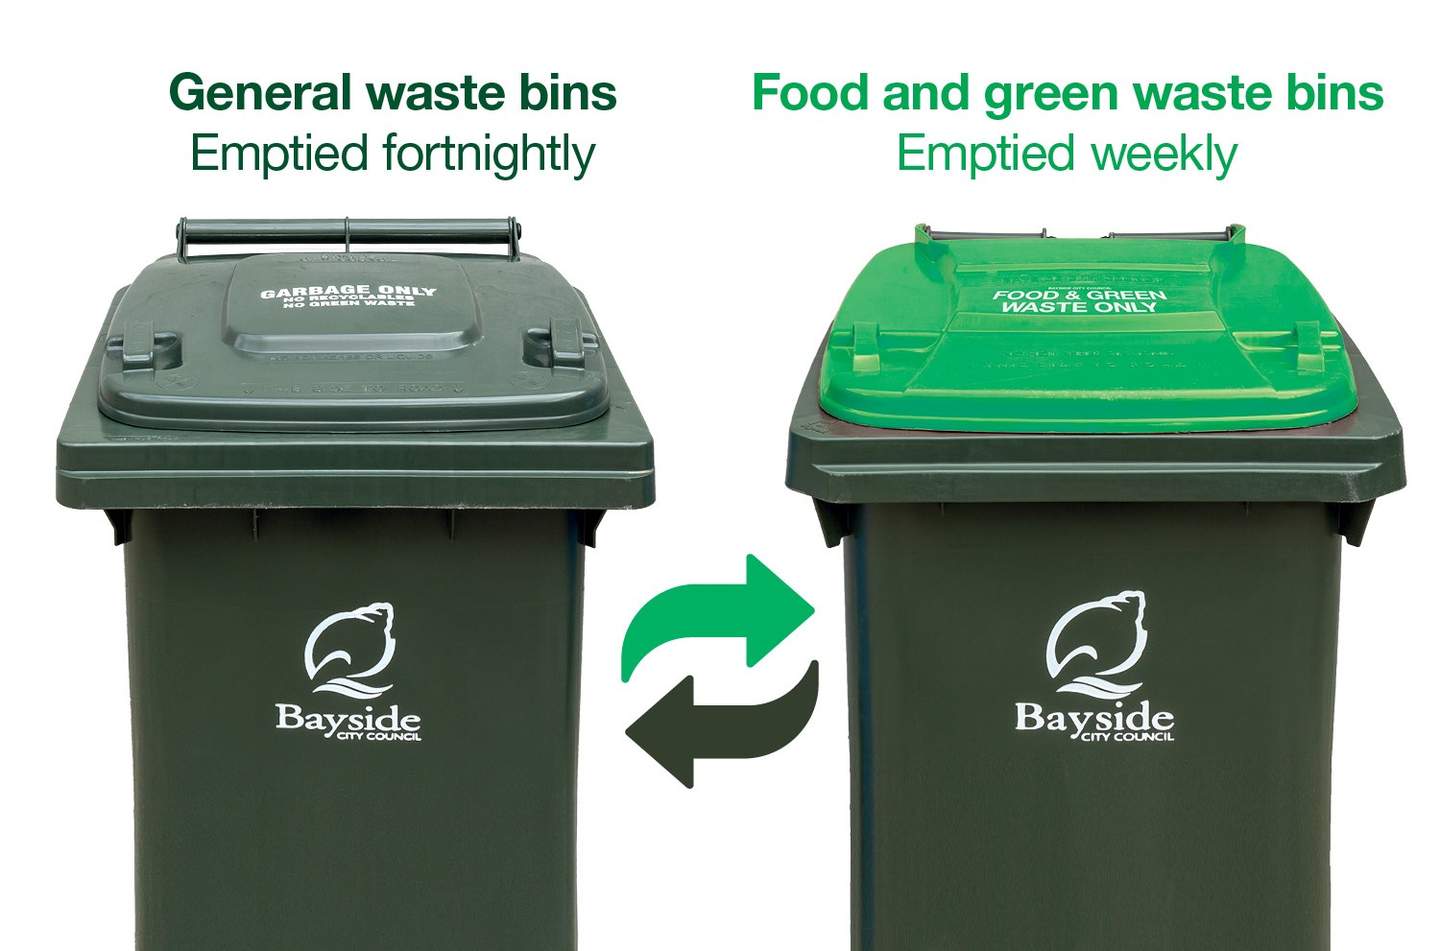 From Monday 4 July 2022, general waste will be collected fortnightly and food and green waste will be collected weekly